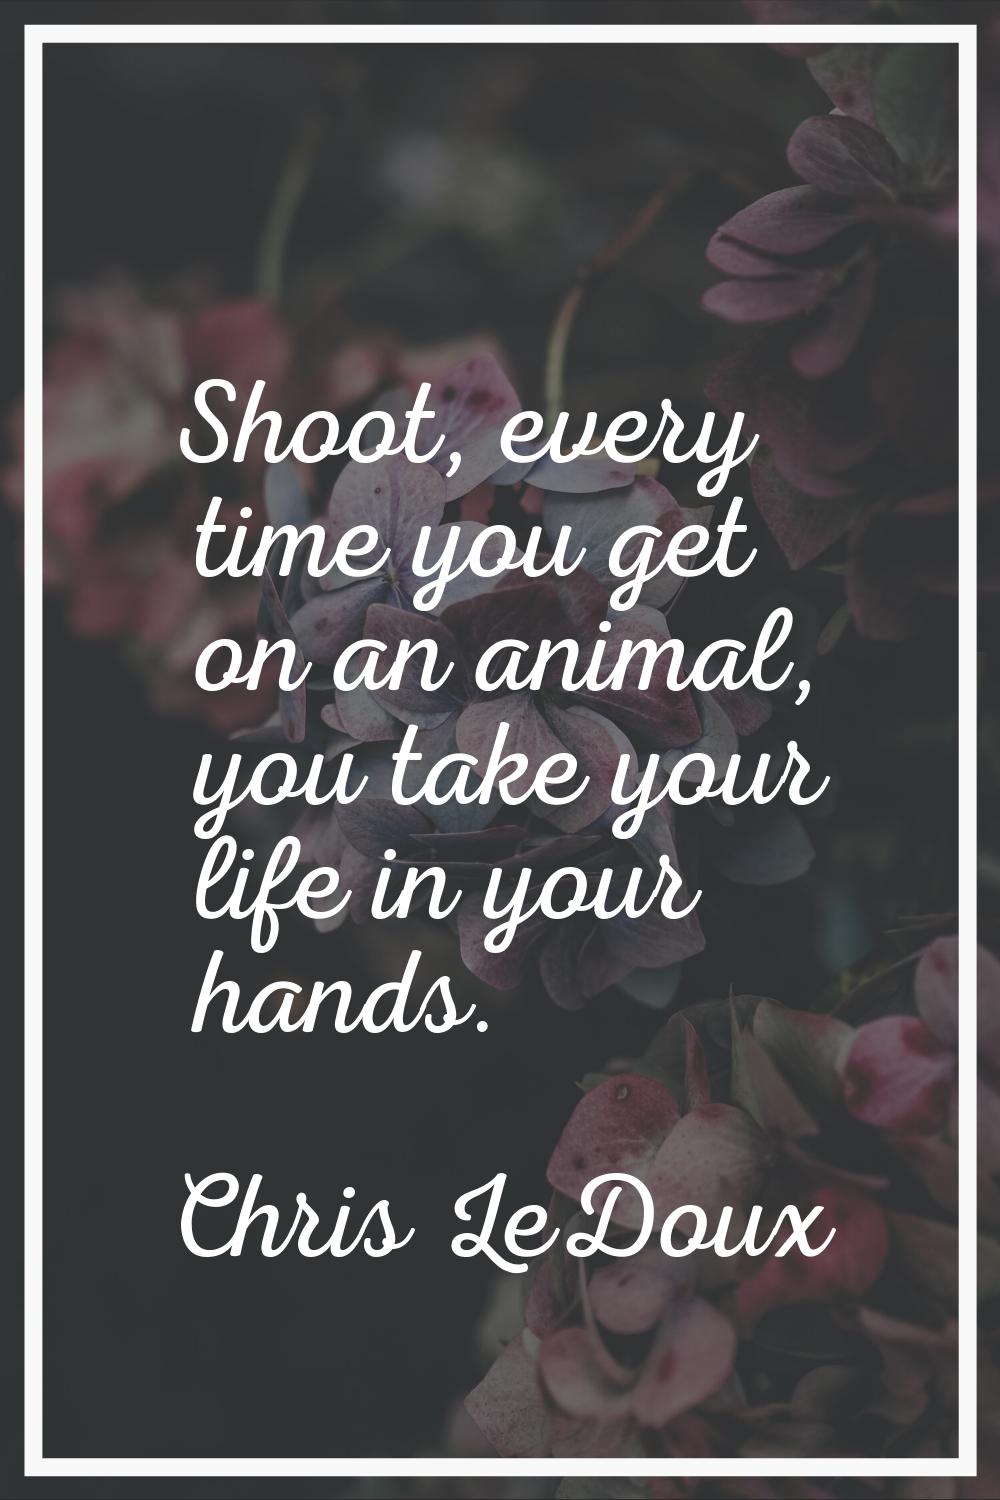 Shoot, every time you get on an animal, you take your life in your hands.